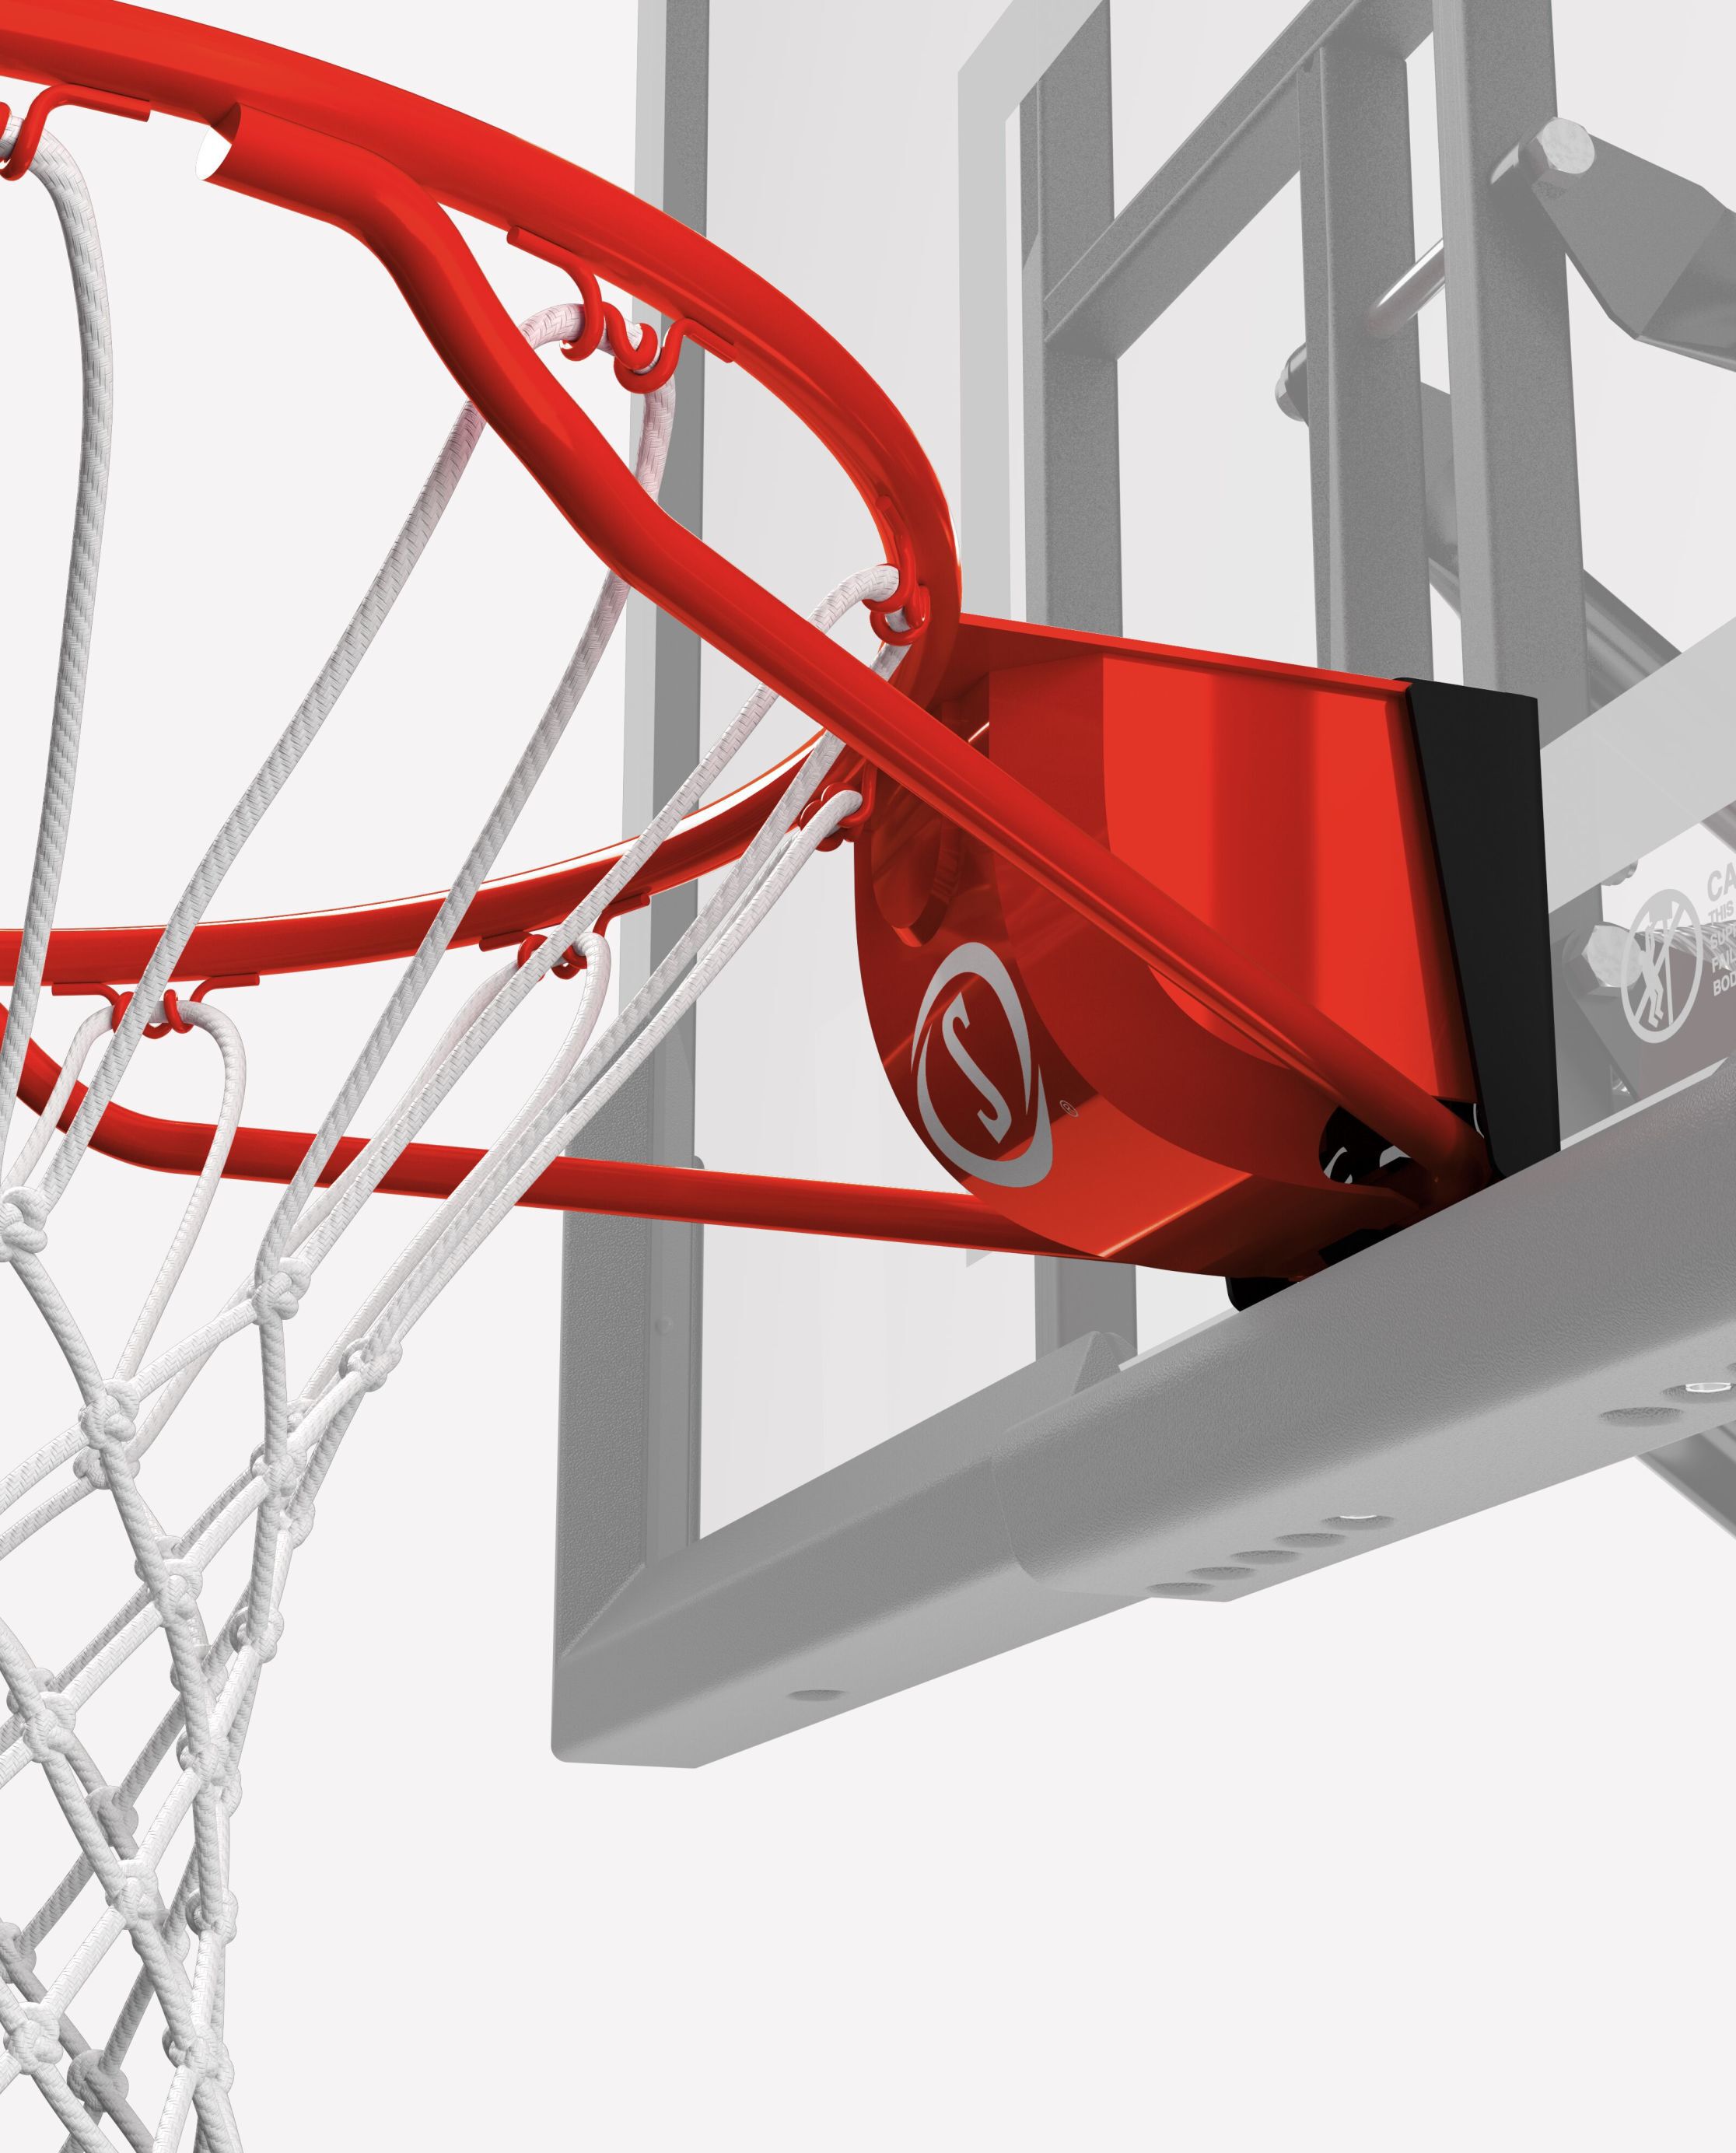 Pro Slam Professional 180º Heavy Duty Breakaway Basketball Rim，18 inch Double Spring Flex Rim Goal Replacement fit Indoor and Outdoor Backboard 